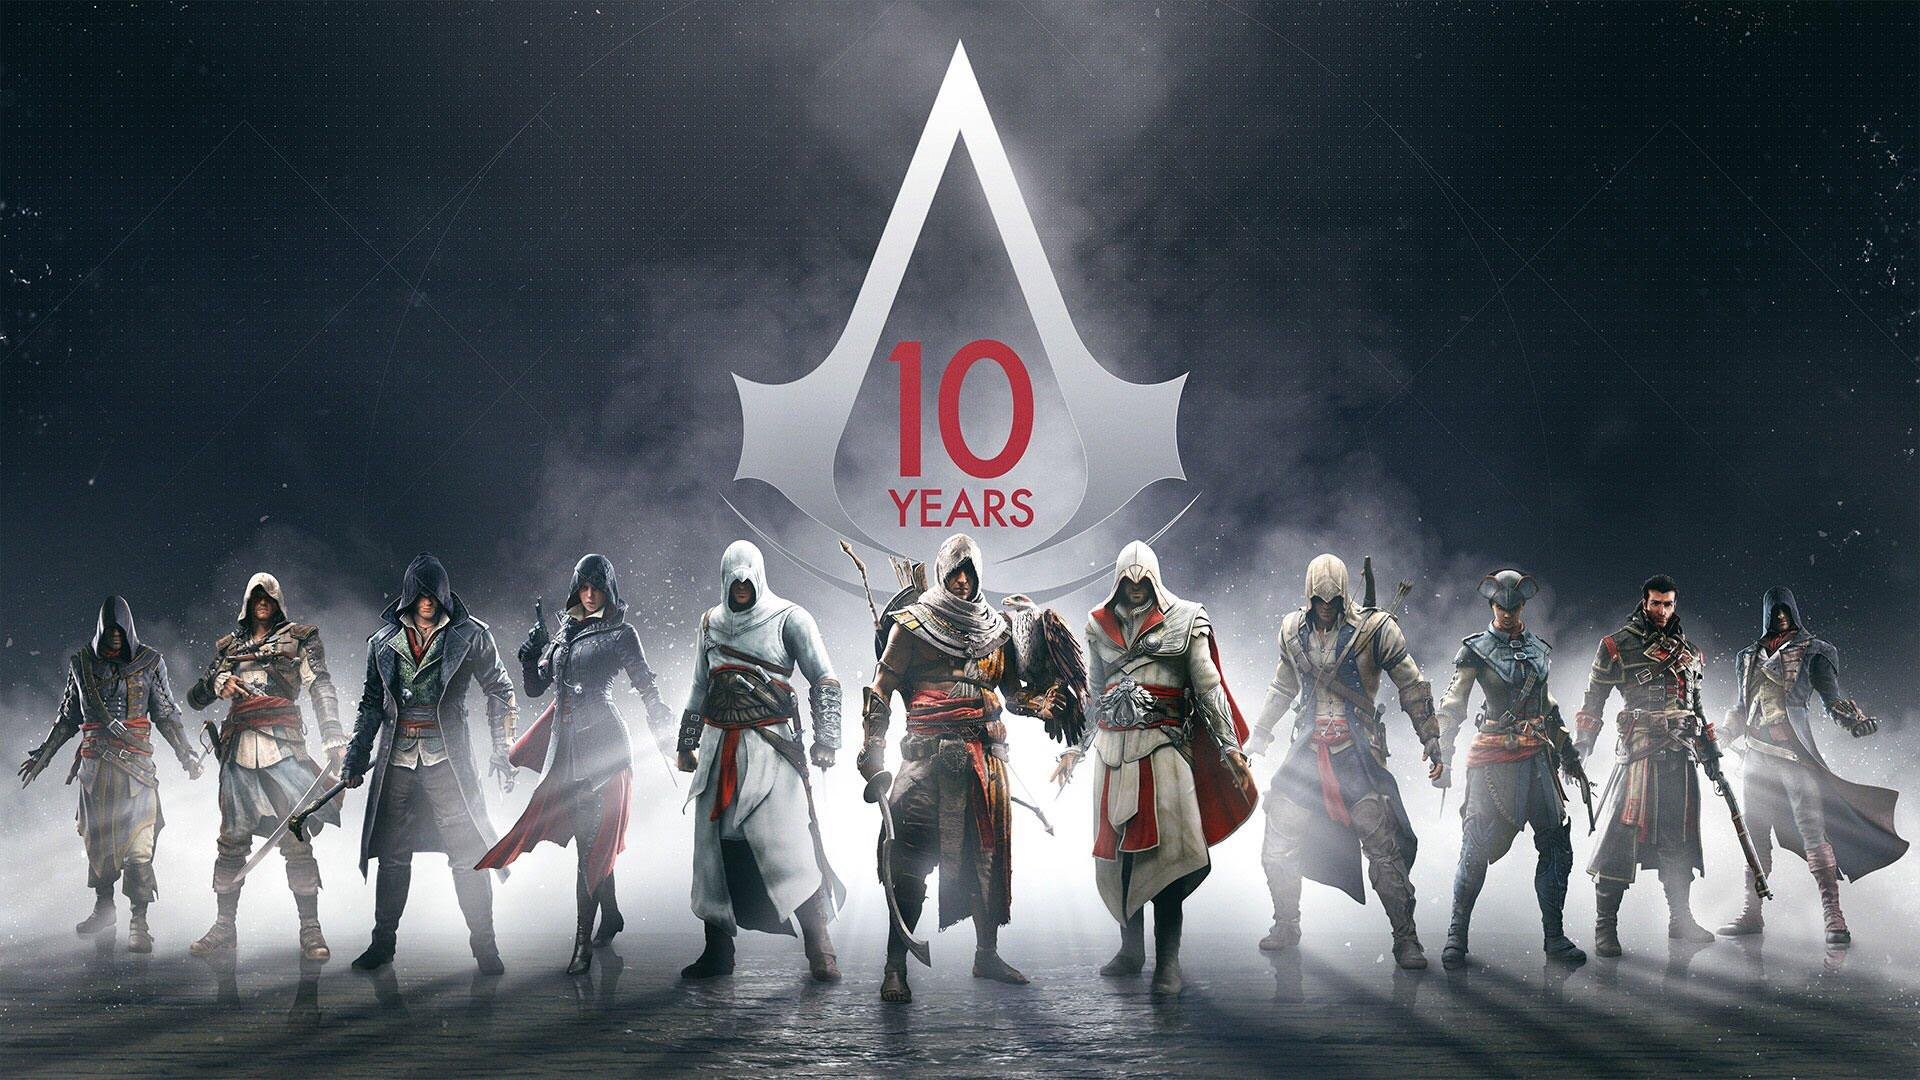 Assassin's Creed 10 Years - HD Wallpaper 